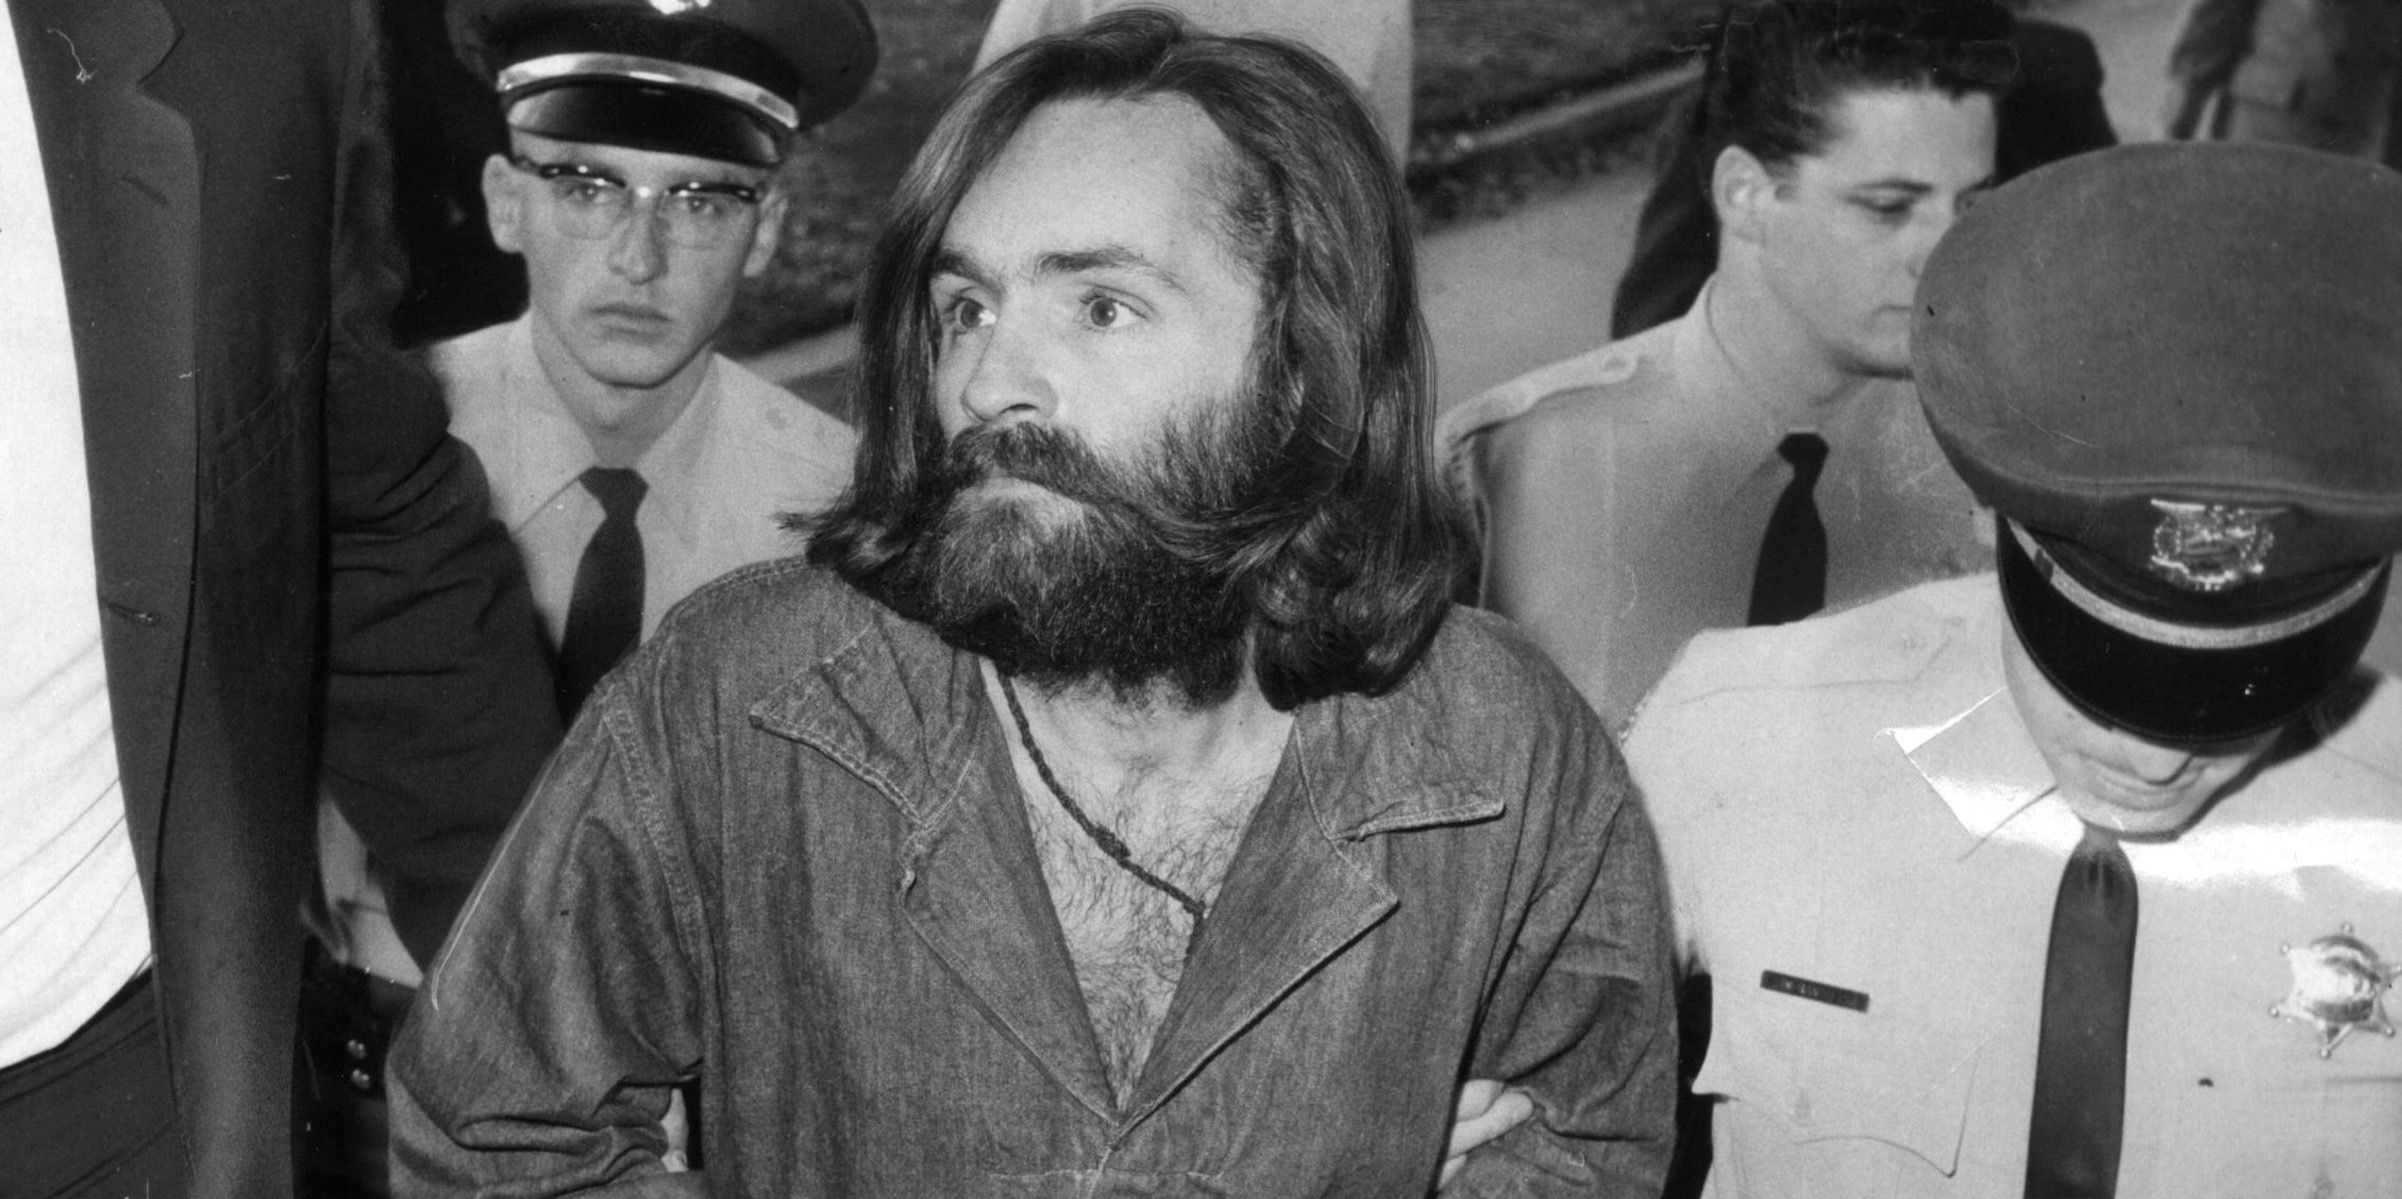 Charles Manson in real life.